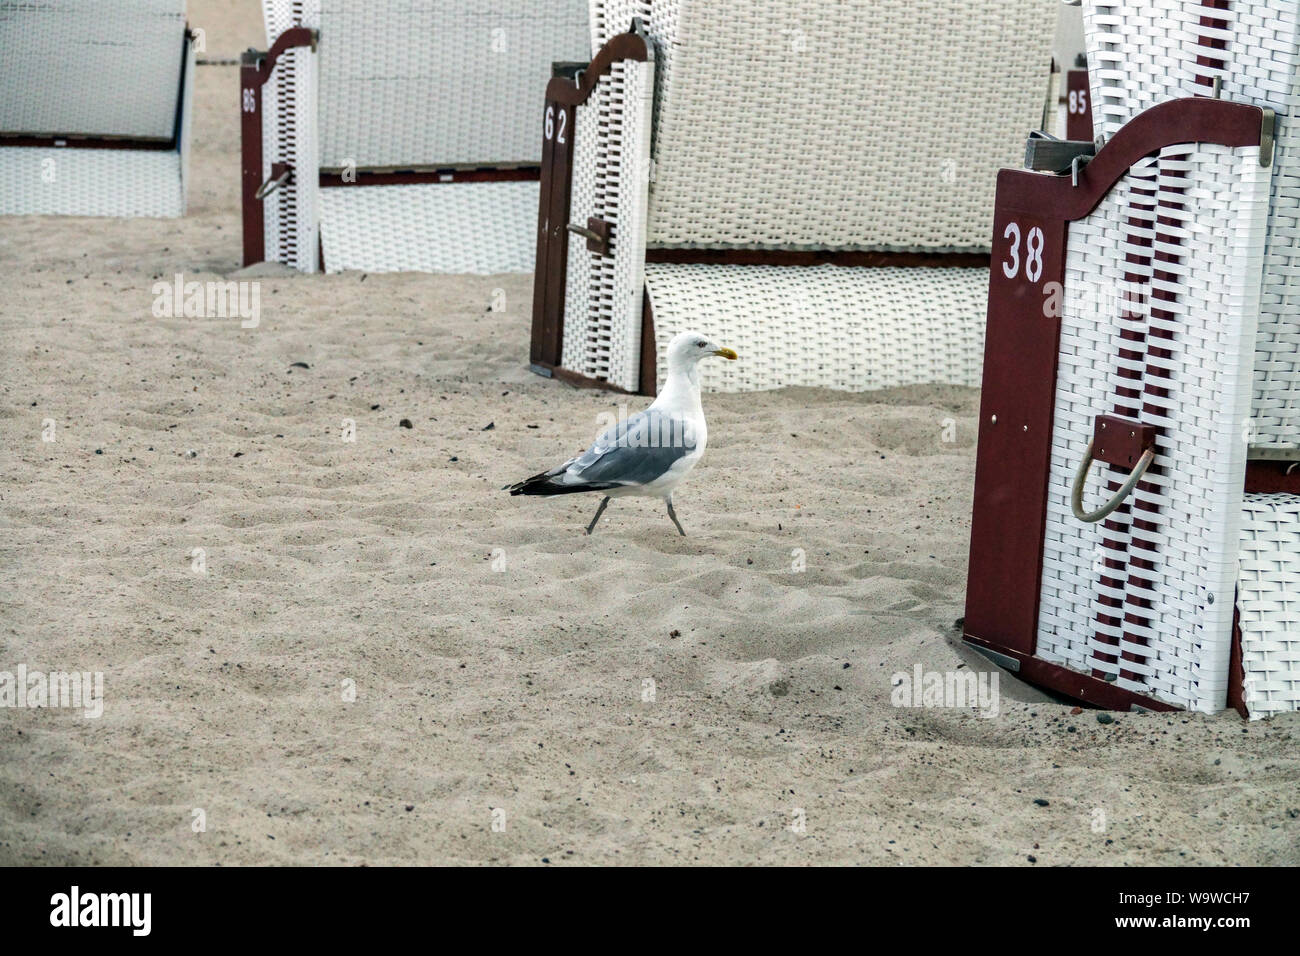 A seagull walks among beach chairs looking for something to eat, Warnemunde, Rostock Germany Stock Photo